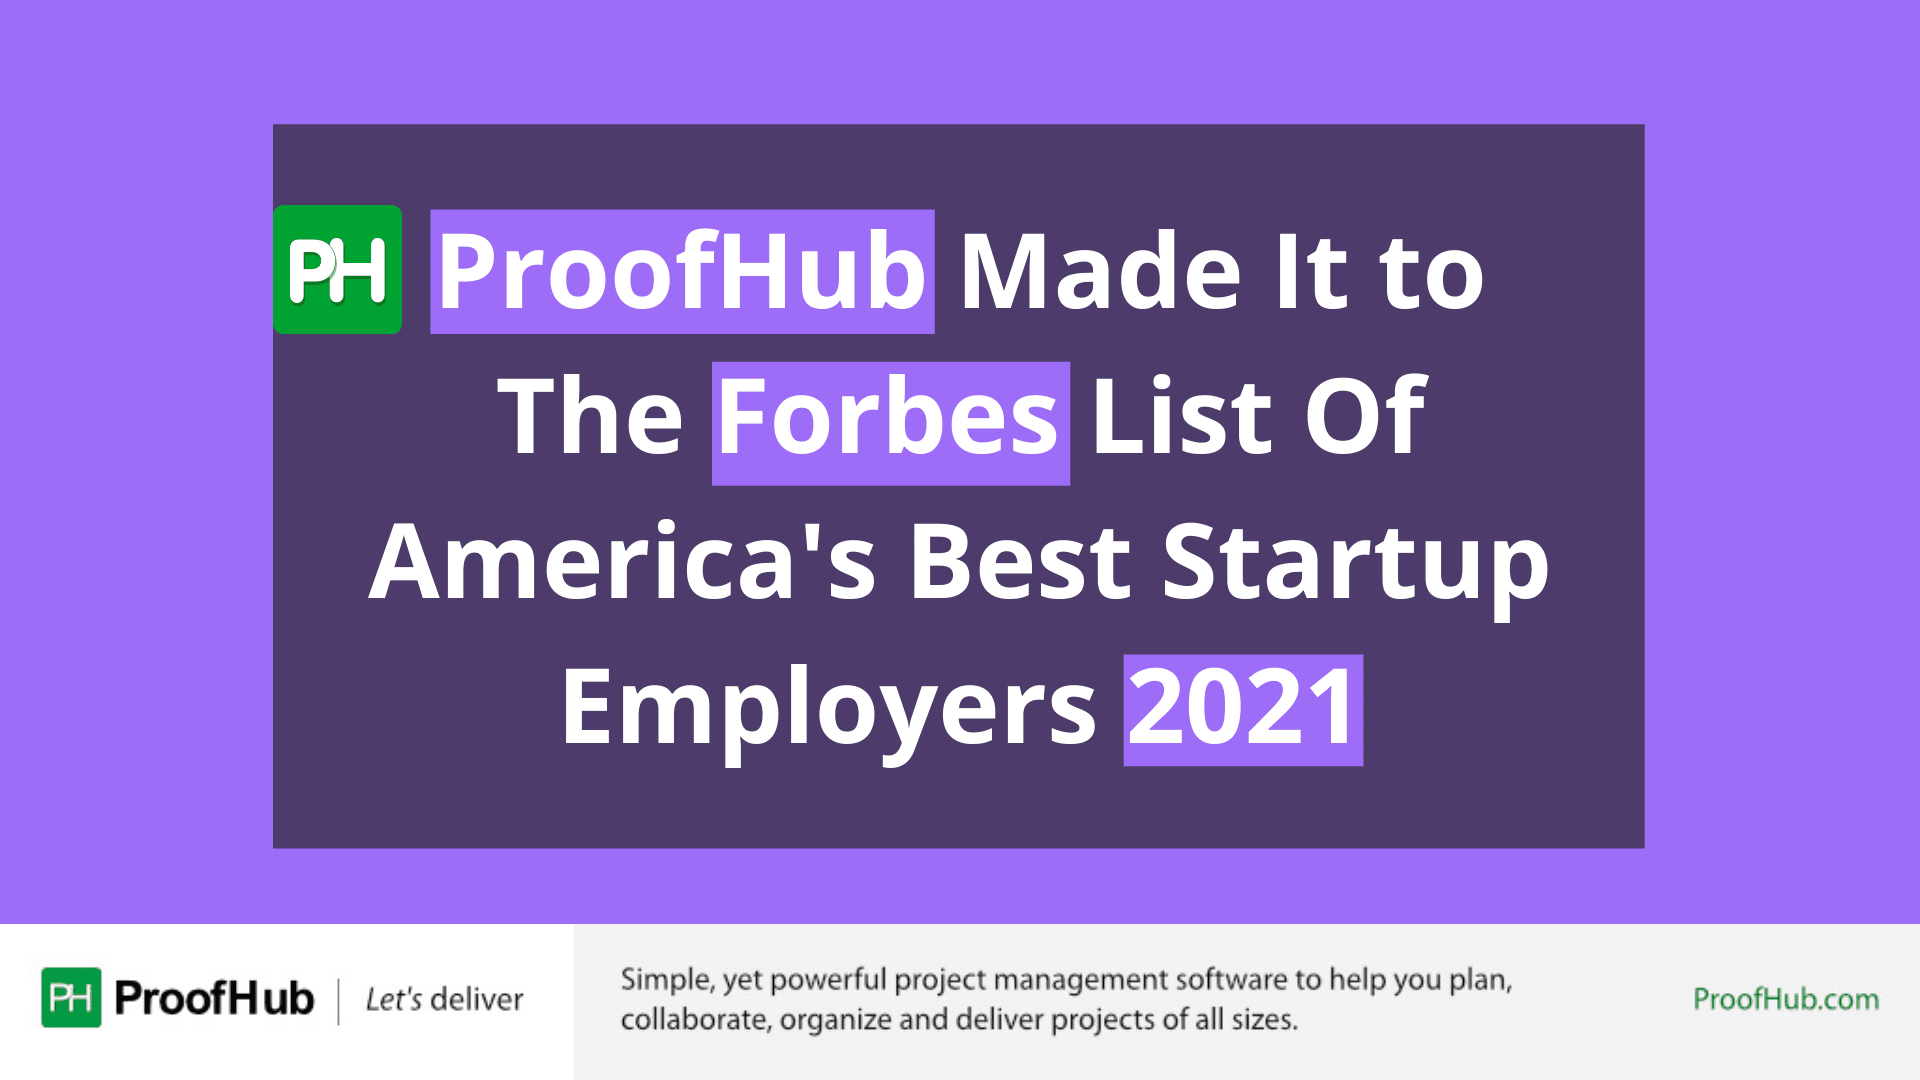 ProofHub Made It to The Forbes List Of America’s Best Startup Employers 2021